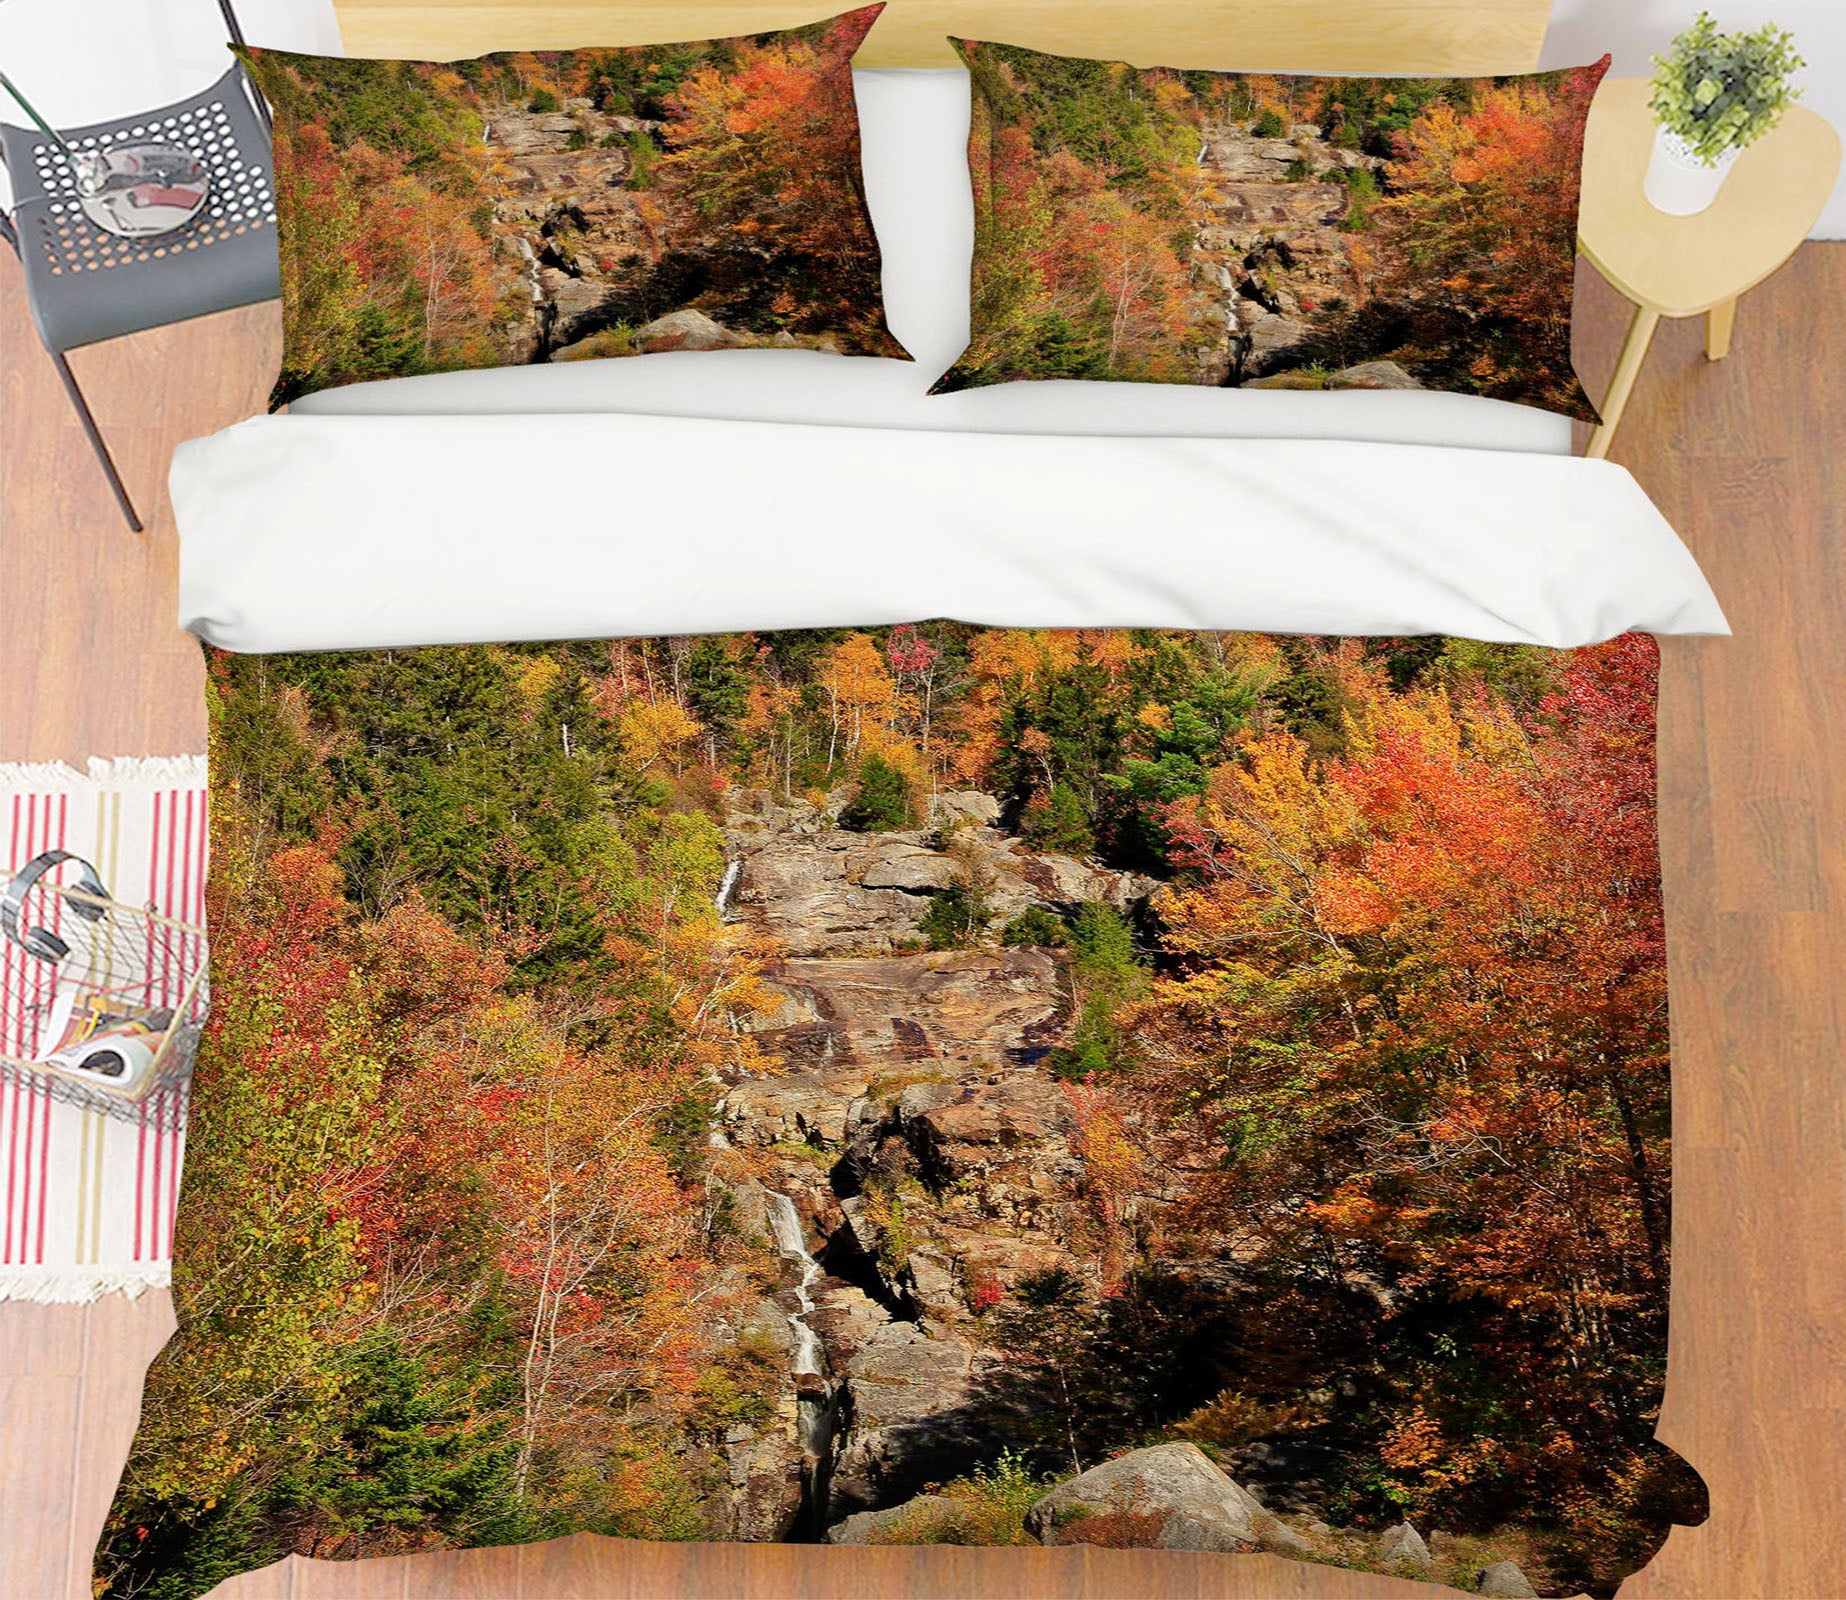 3D Trees In The Mountains 62195 Kathy Barefield Bedding Bed Pillowcases Quilt